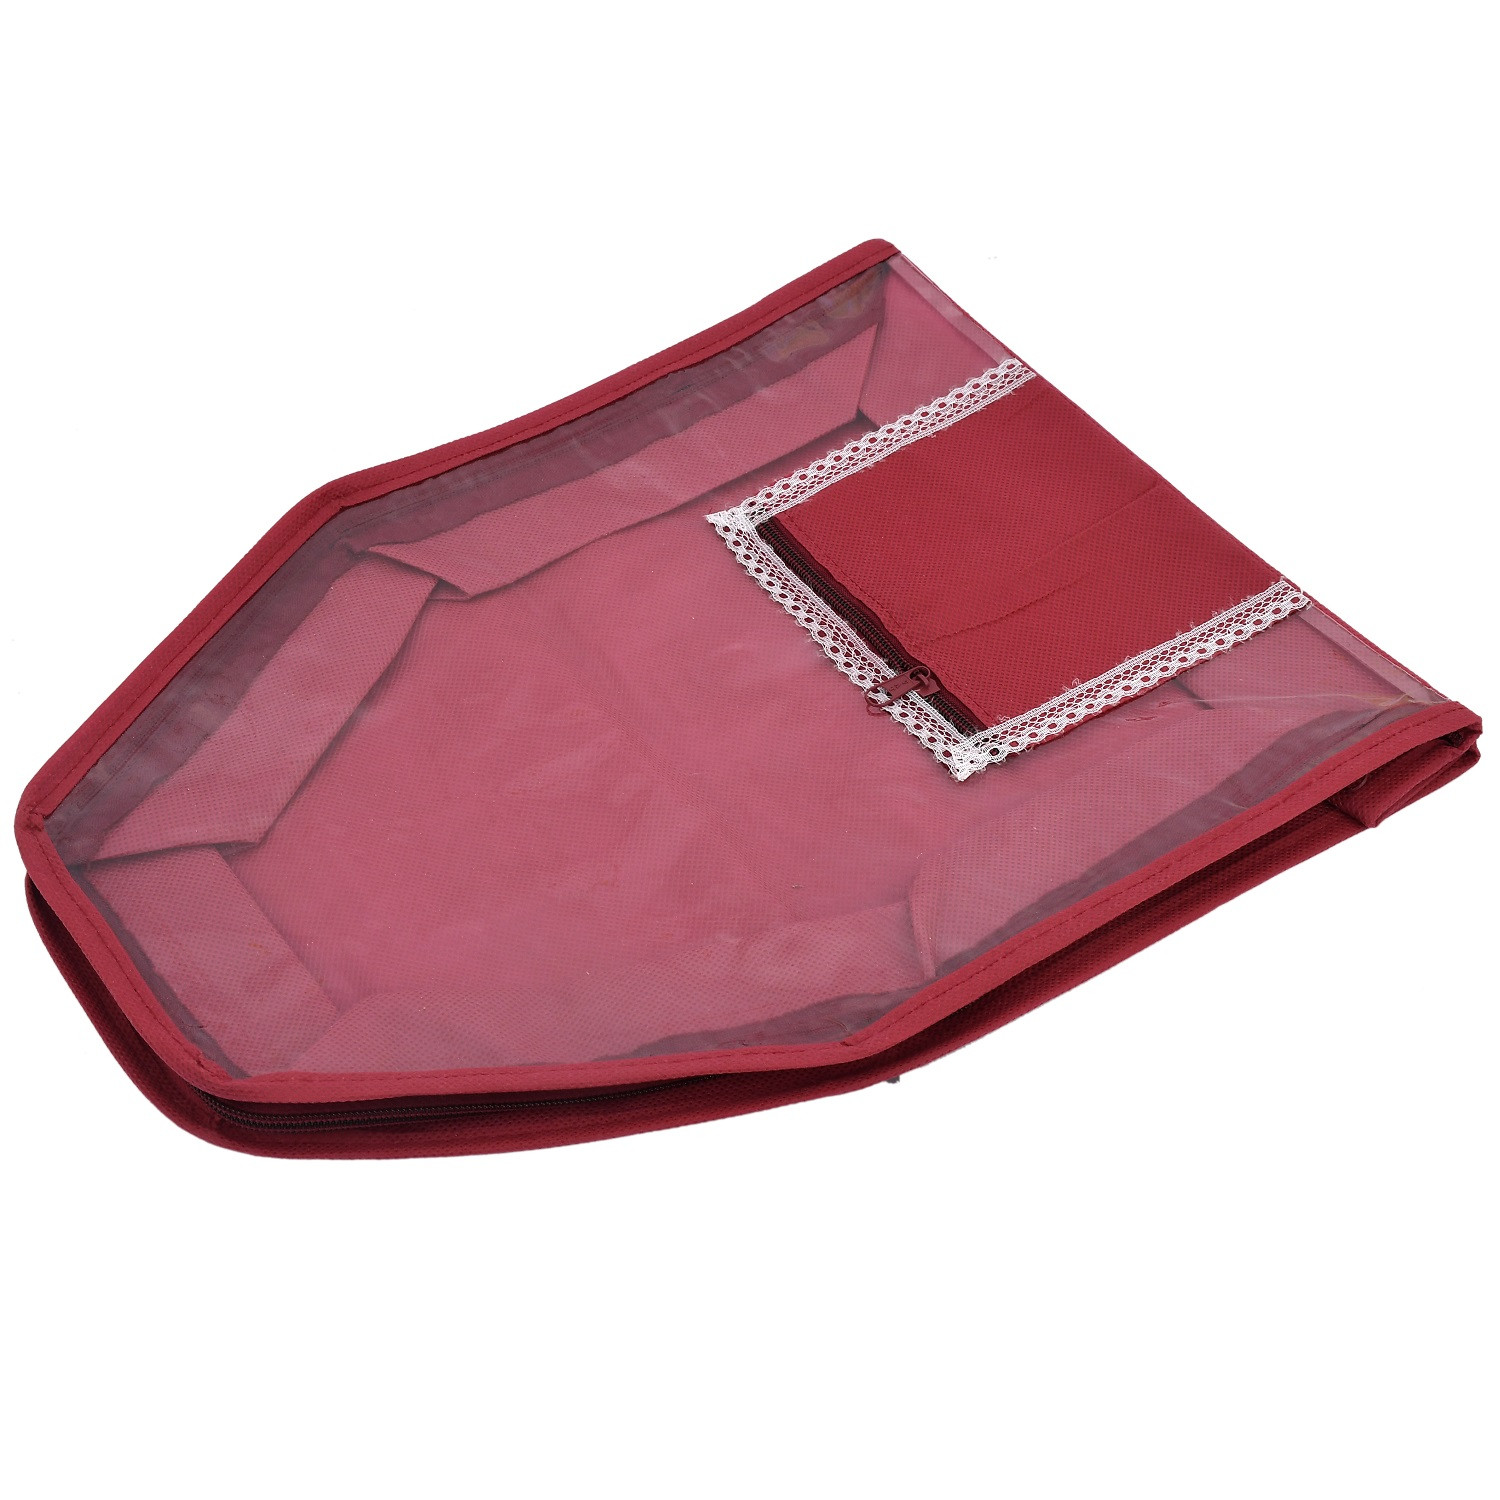 Kuber Industries Non Woven Saree Cover/Cloth Wardrobe Organizer and Blouse Cover Combo Set (Maroon)